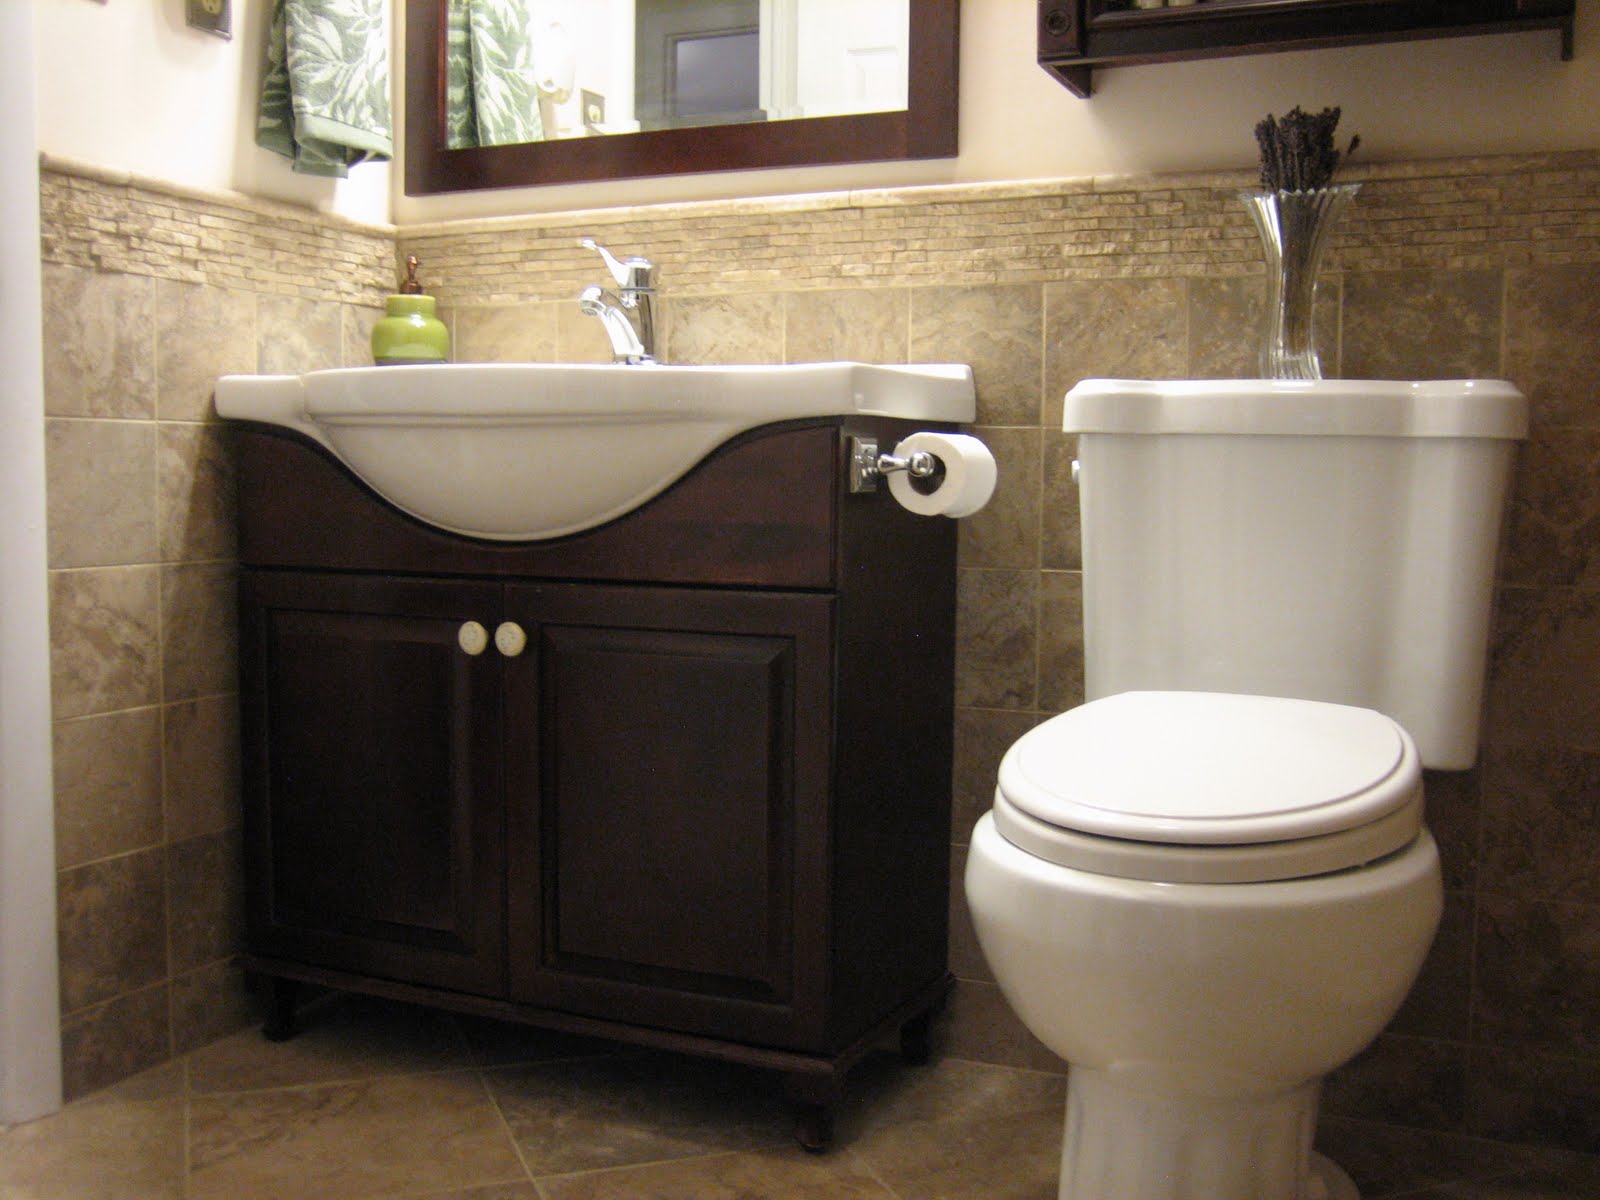 compact bathroom designs predict many years of relaxing showers for the happy homeowner!